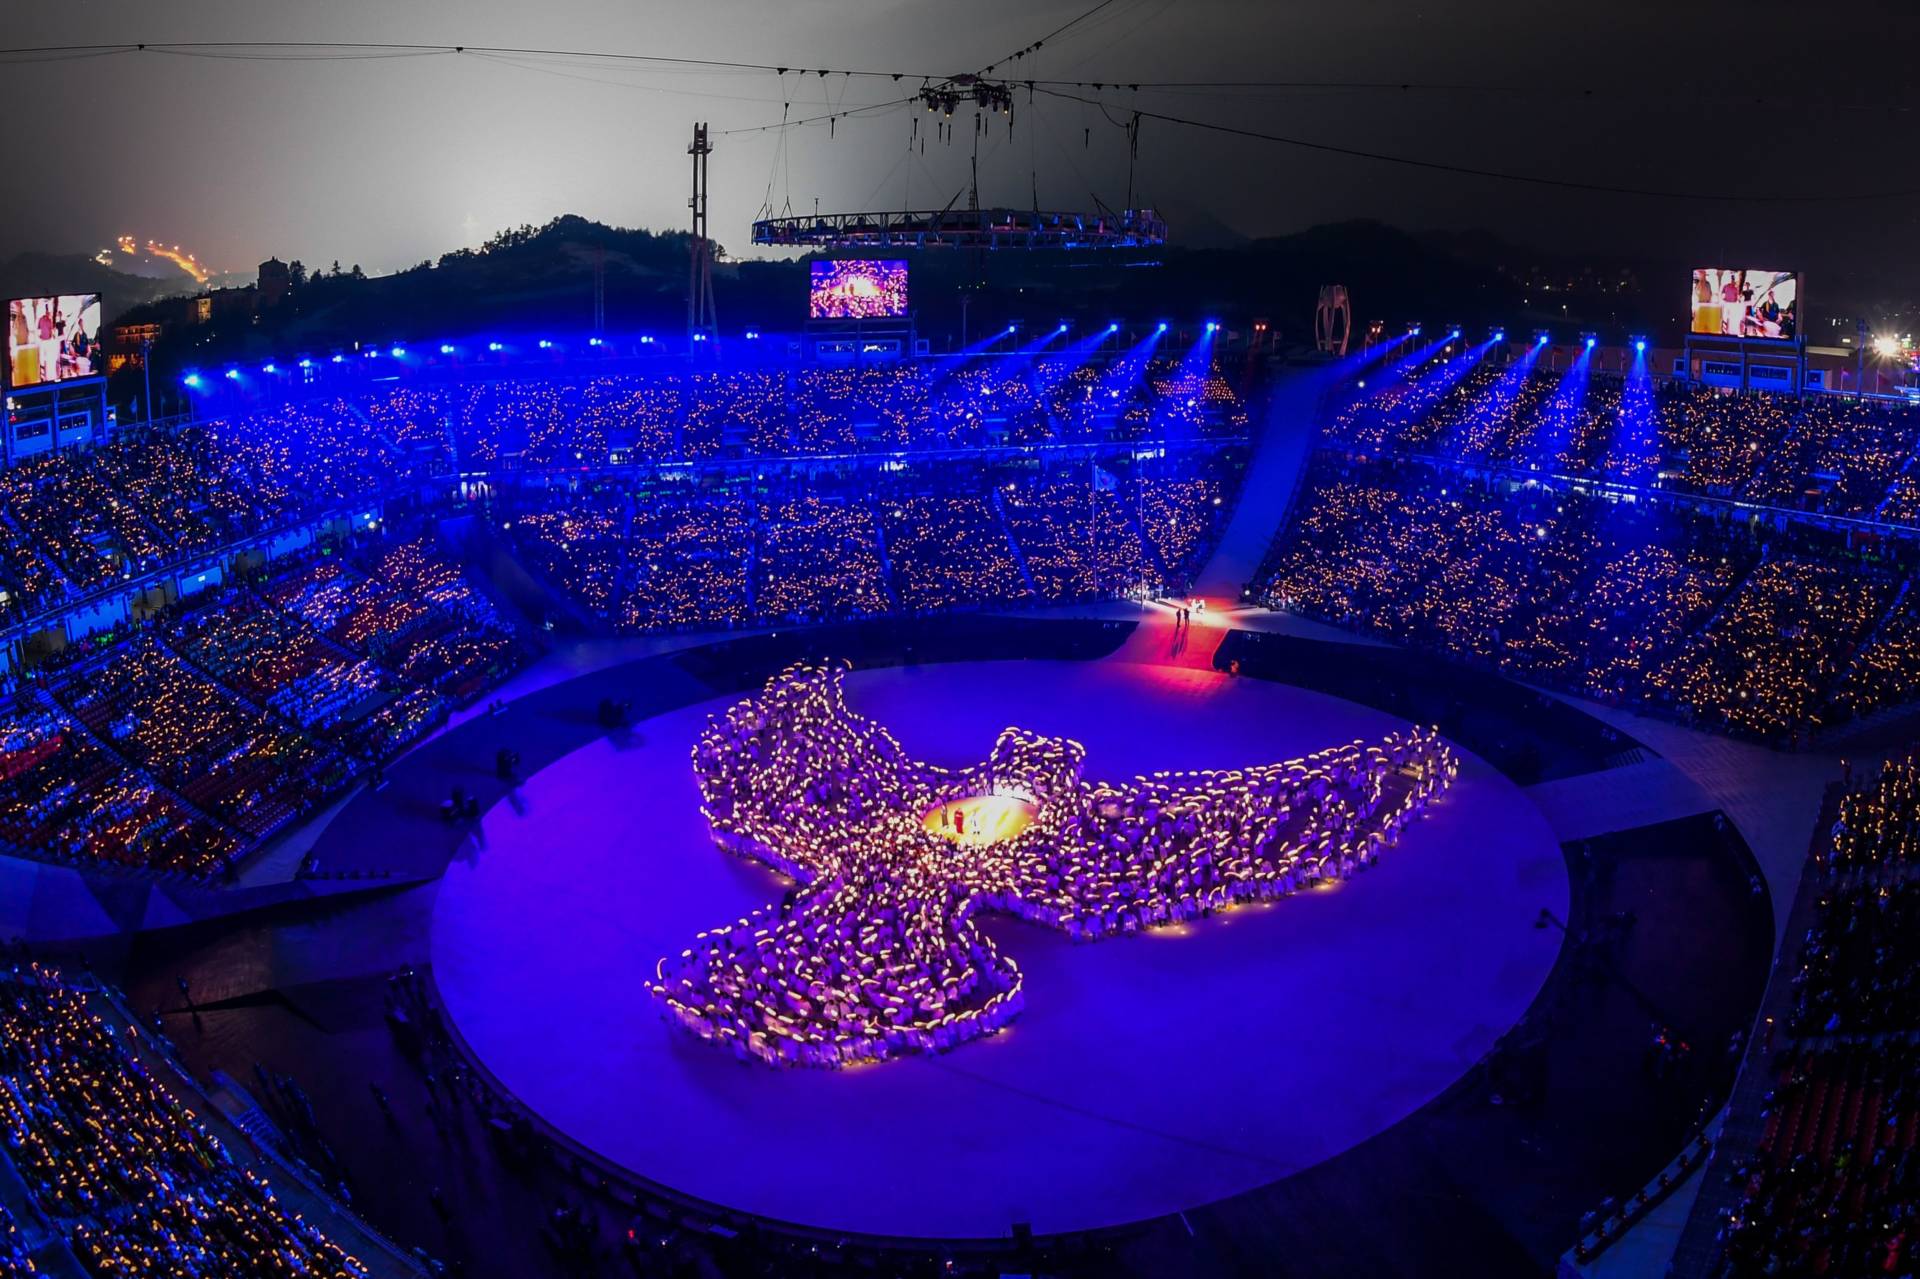 More than 1,200 people, including 1,000 residents of Gangwon province, form the shape of a dove out of candlelight during the opening ceremony. Francois-Xavier Marit/AFP/Getty Images